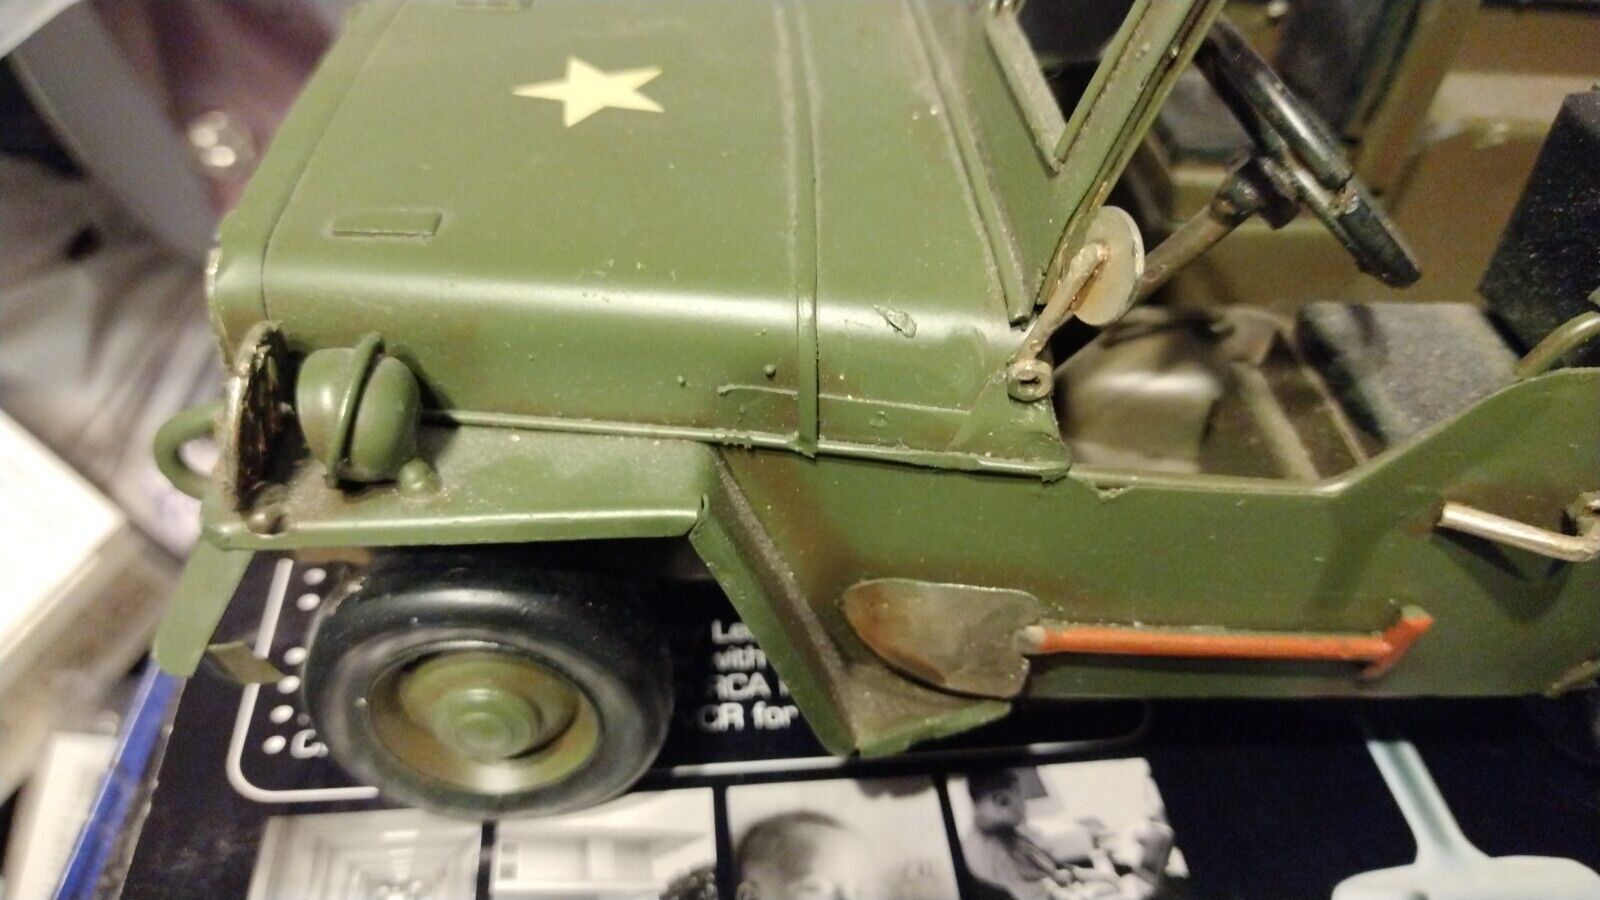 Vintage Hand Crafted Army Jeep Replica - One of a Kind Creation